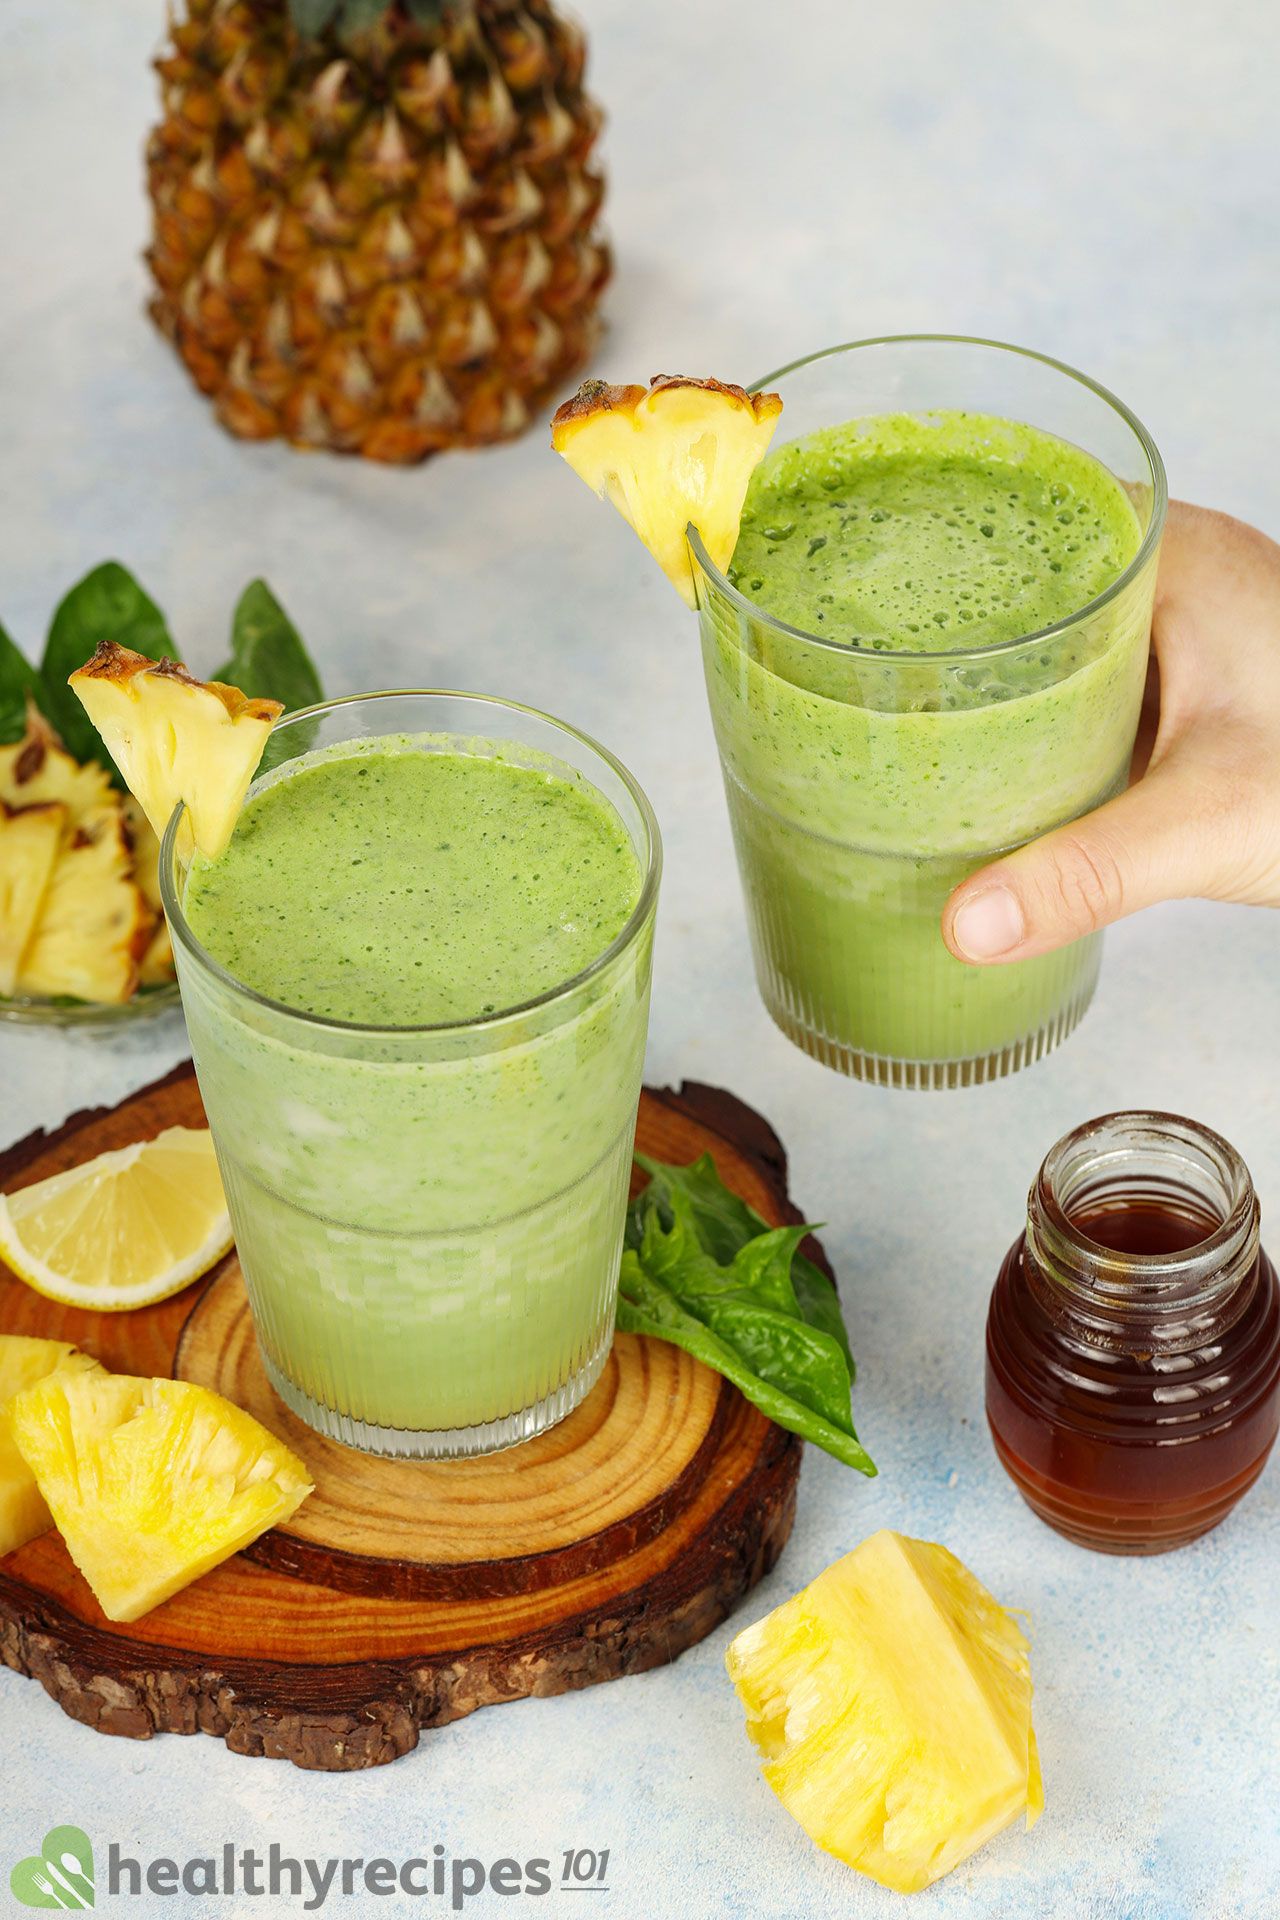 How Long Does This Spinach Green Smoothie Last